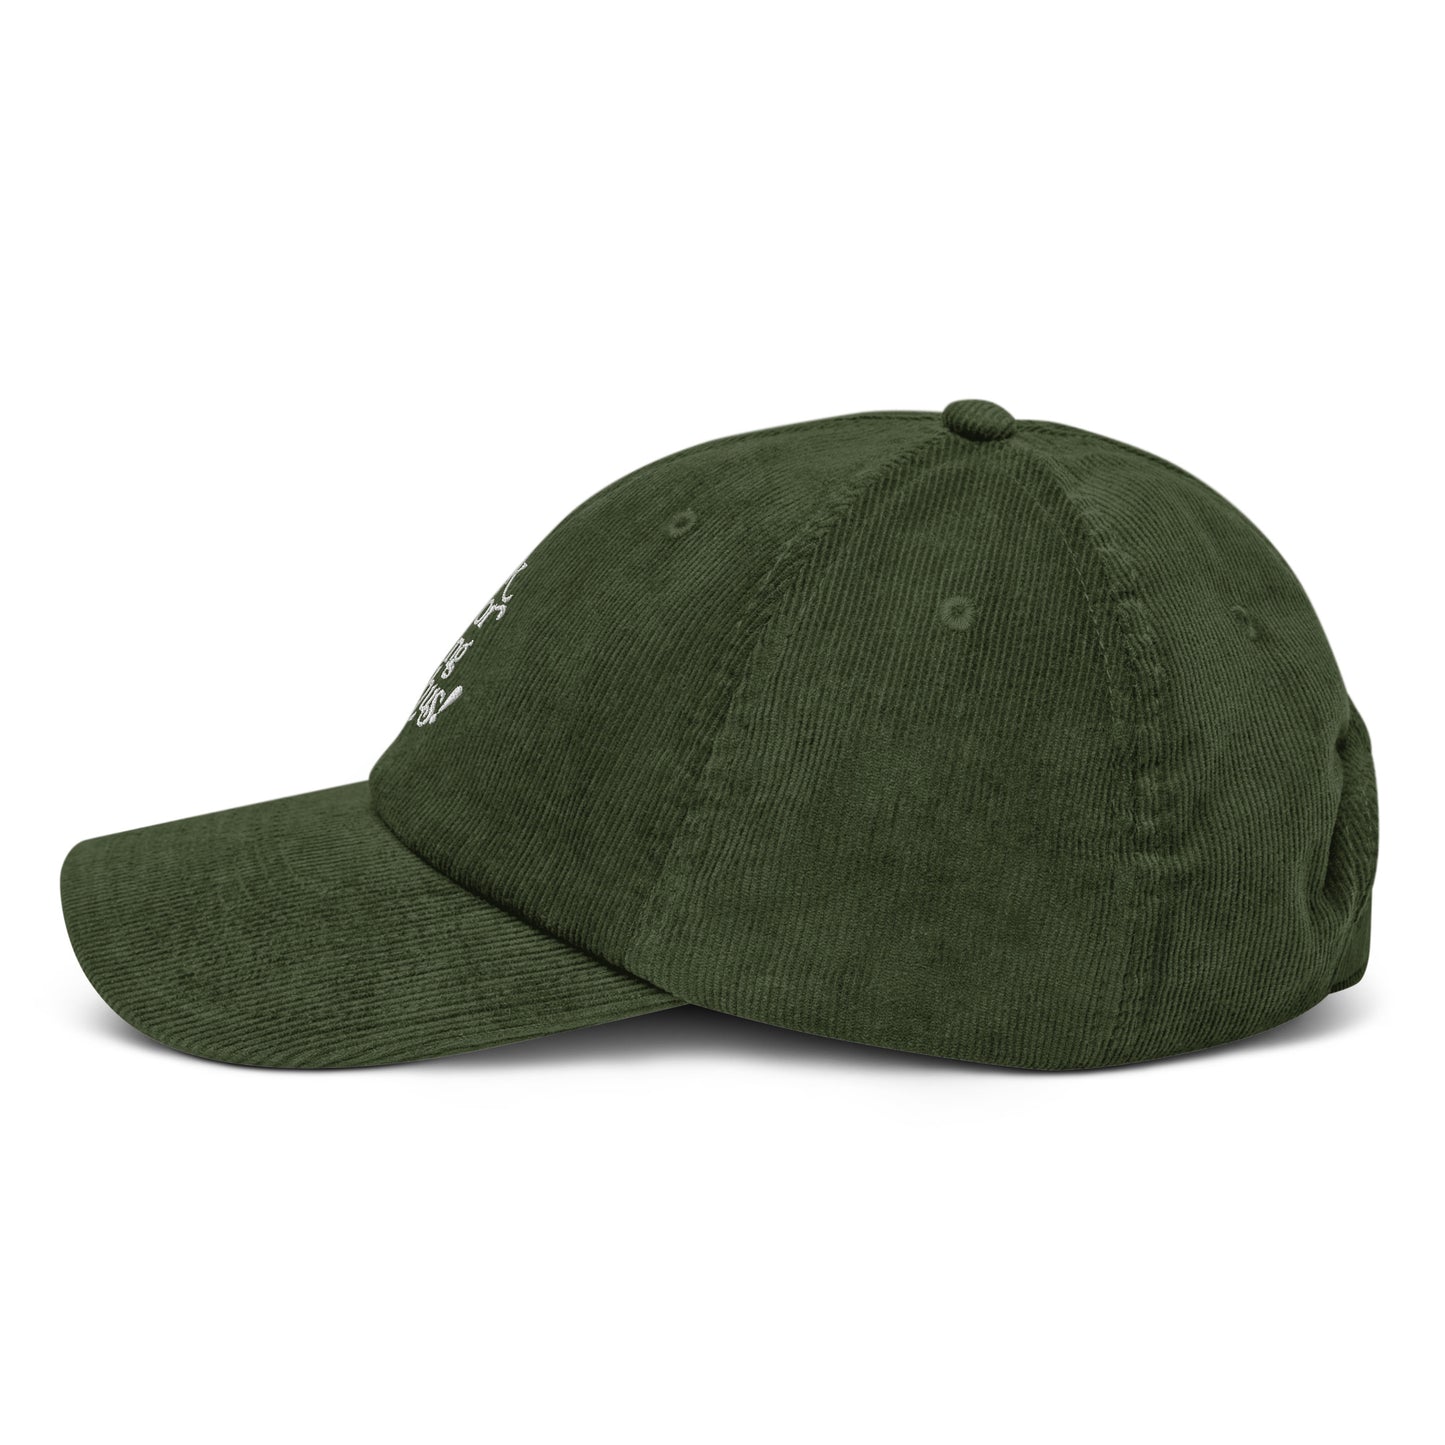 Thank You For Riding With Us! Embroidered Corduroy Cap Green